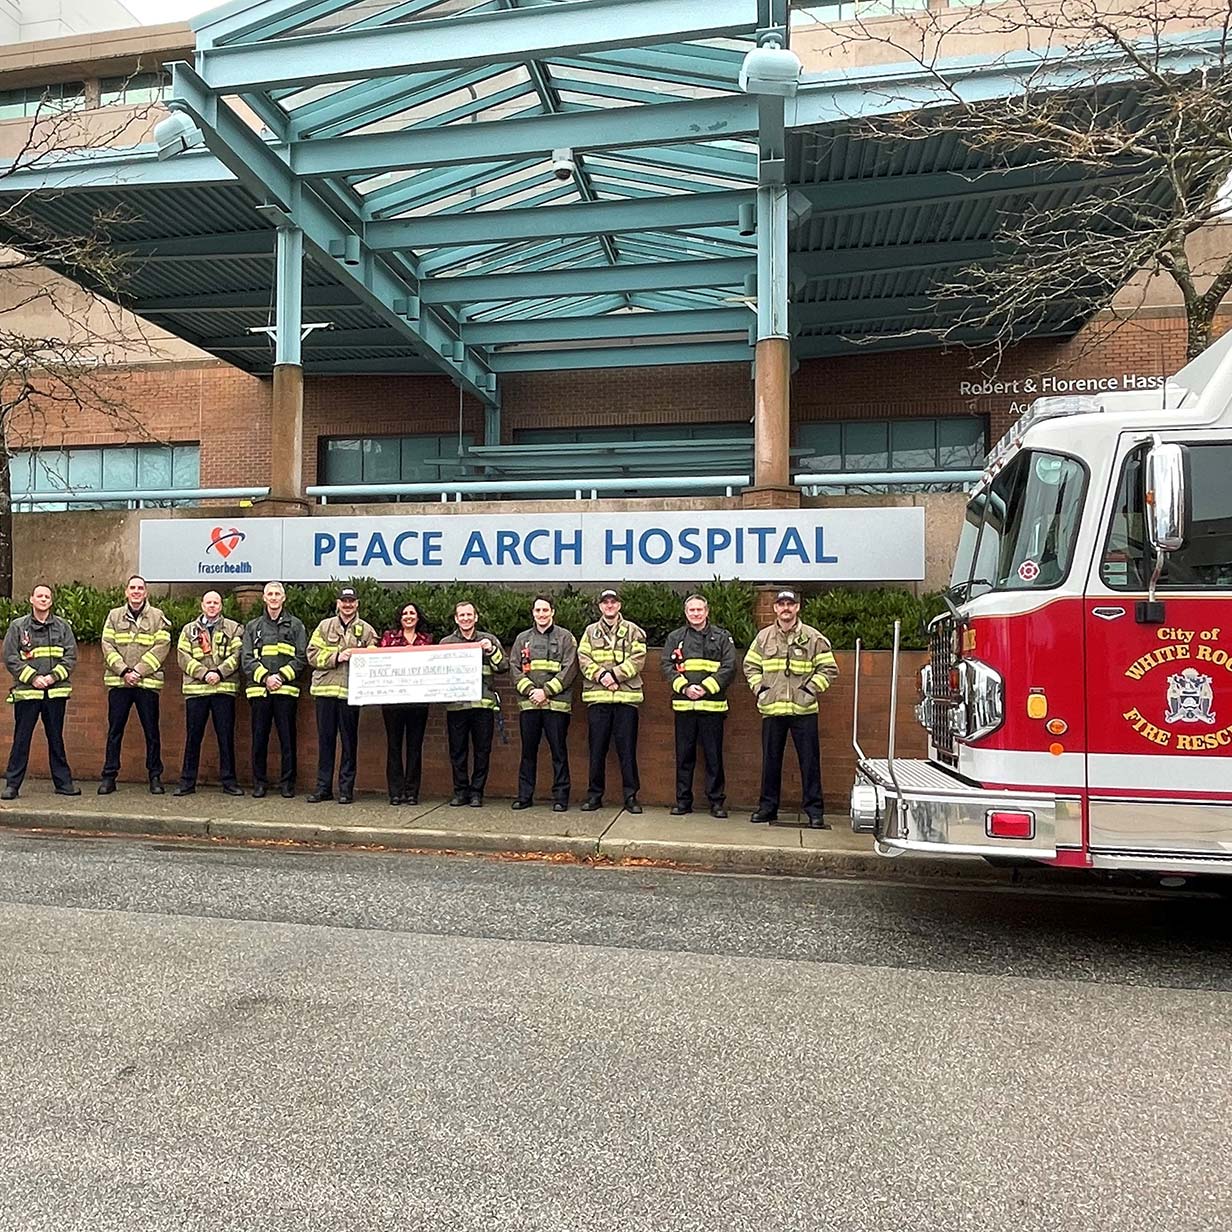 Surrey and White Rock Firefighters band together to make $35,000 donation to mental health care